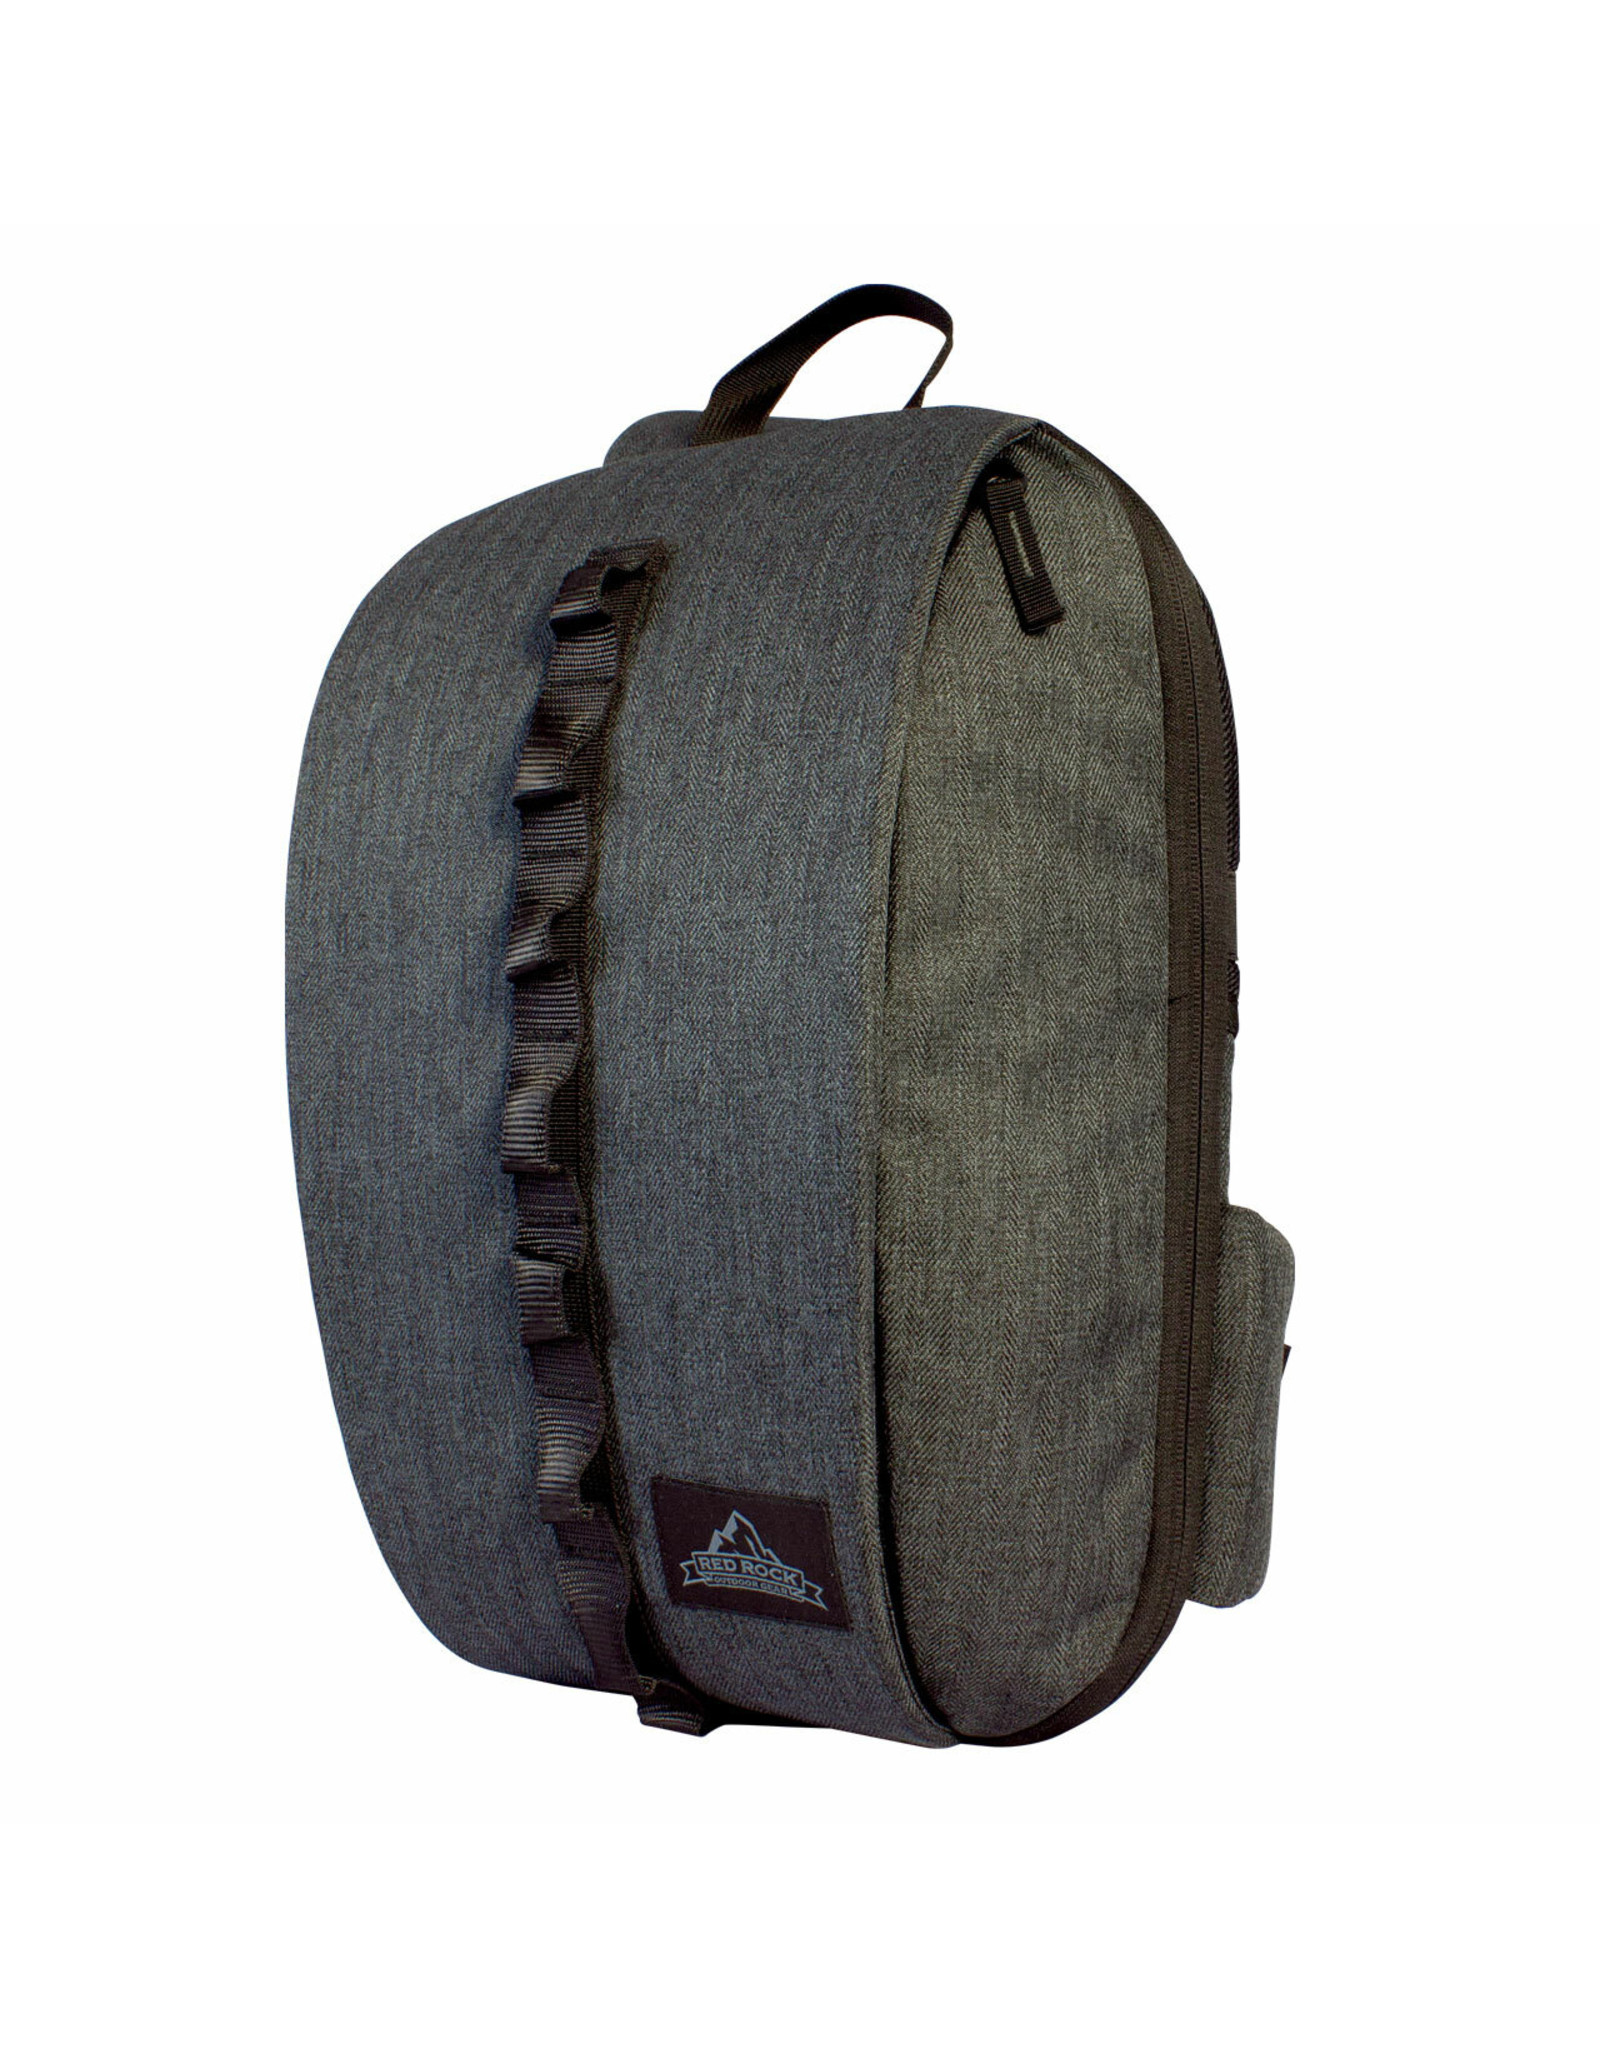 RED ROCK OUTDOOR GEAR SONOMA SLING PACK